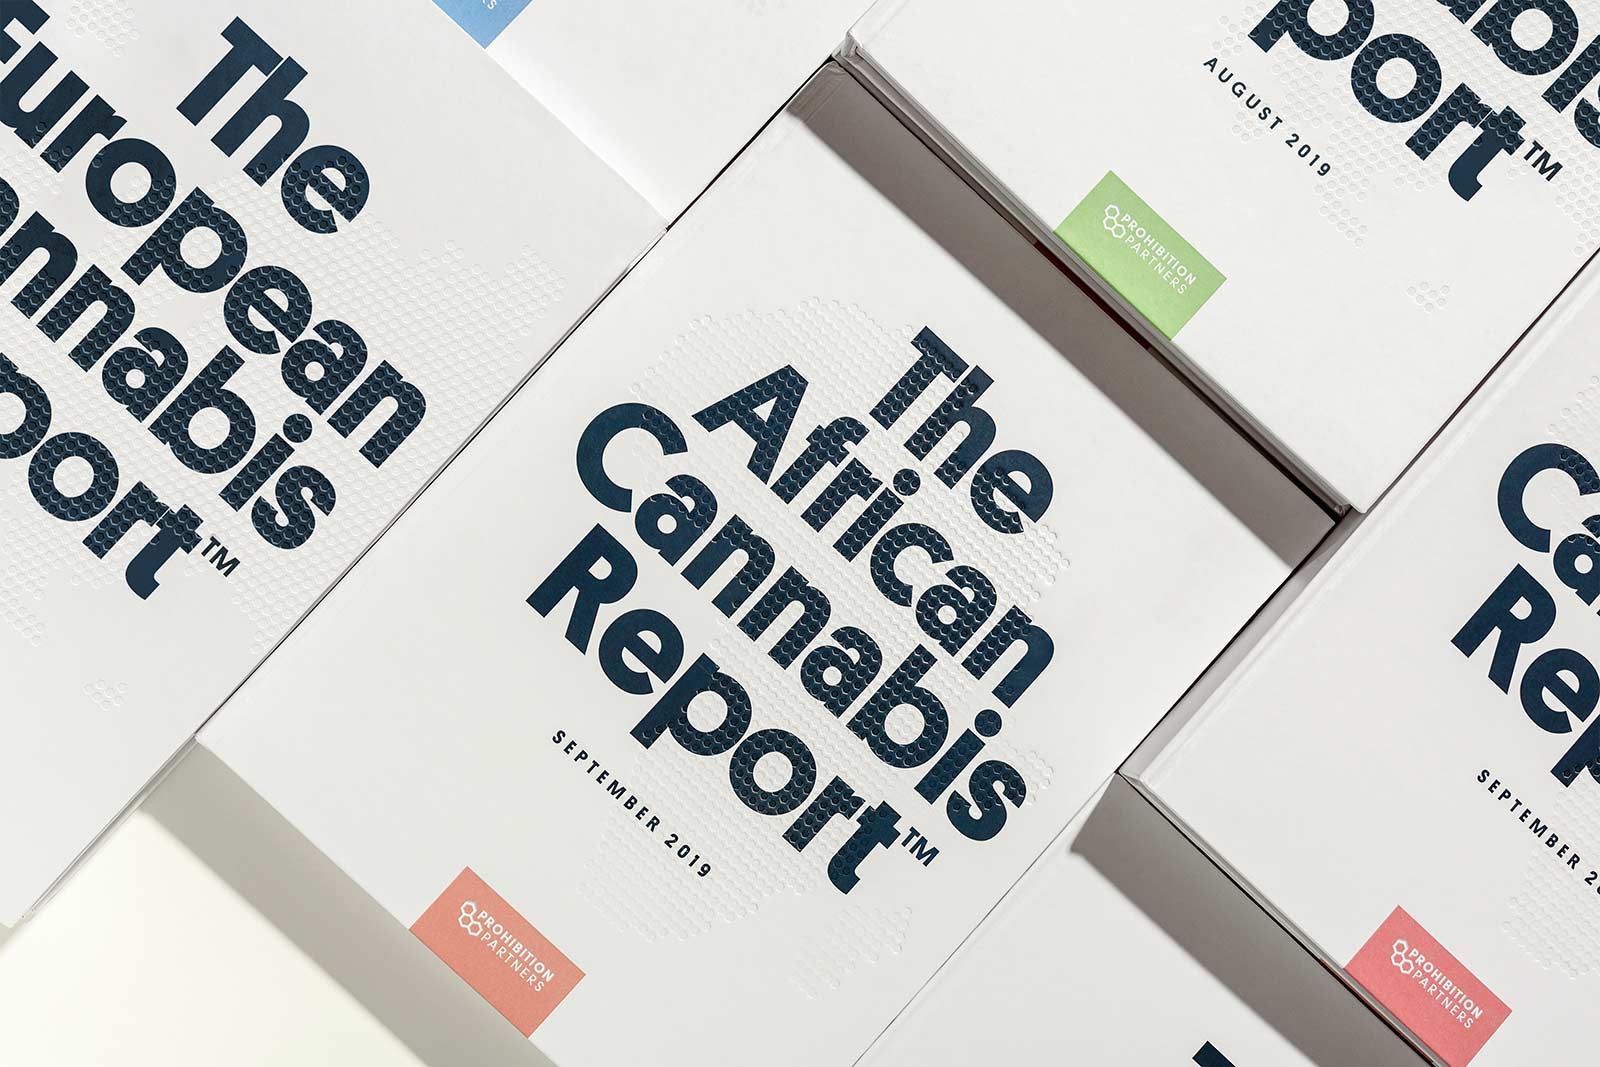 The Cannabis Reports